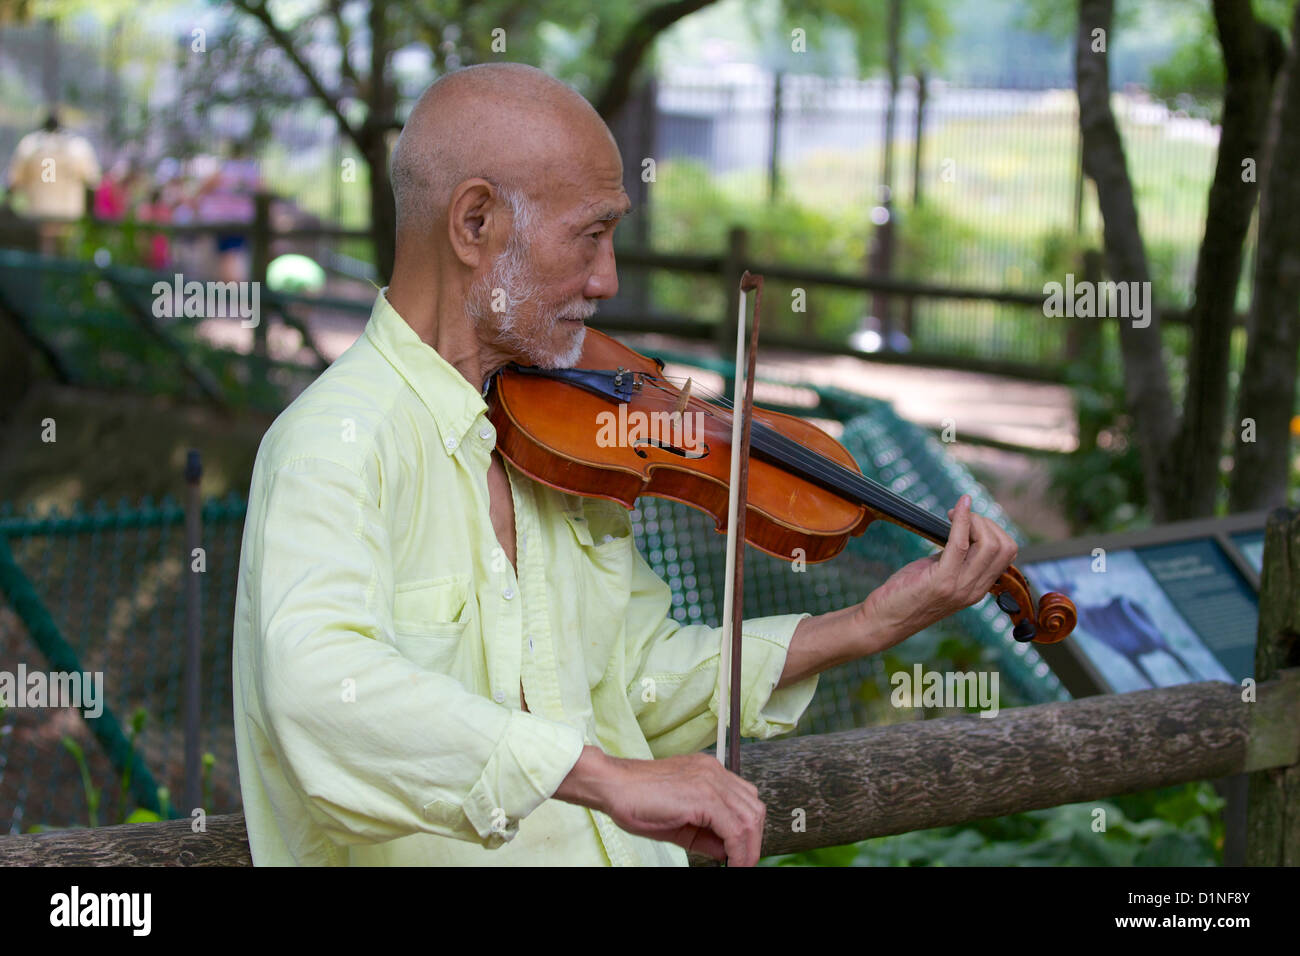 Prisnedsættelse Opera ihærdige Street performer Ying Wei plays violin at Chicago's Lincoln Park Zoo Stock  Photo - Alamy